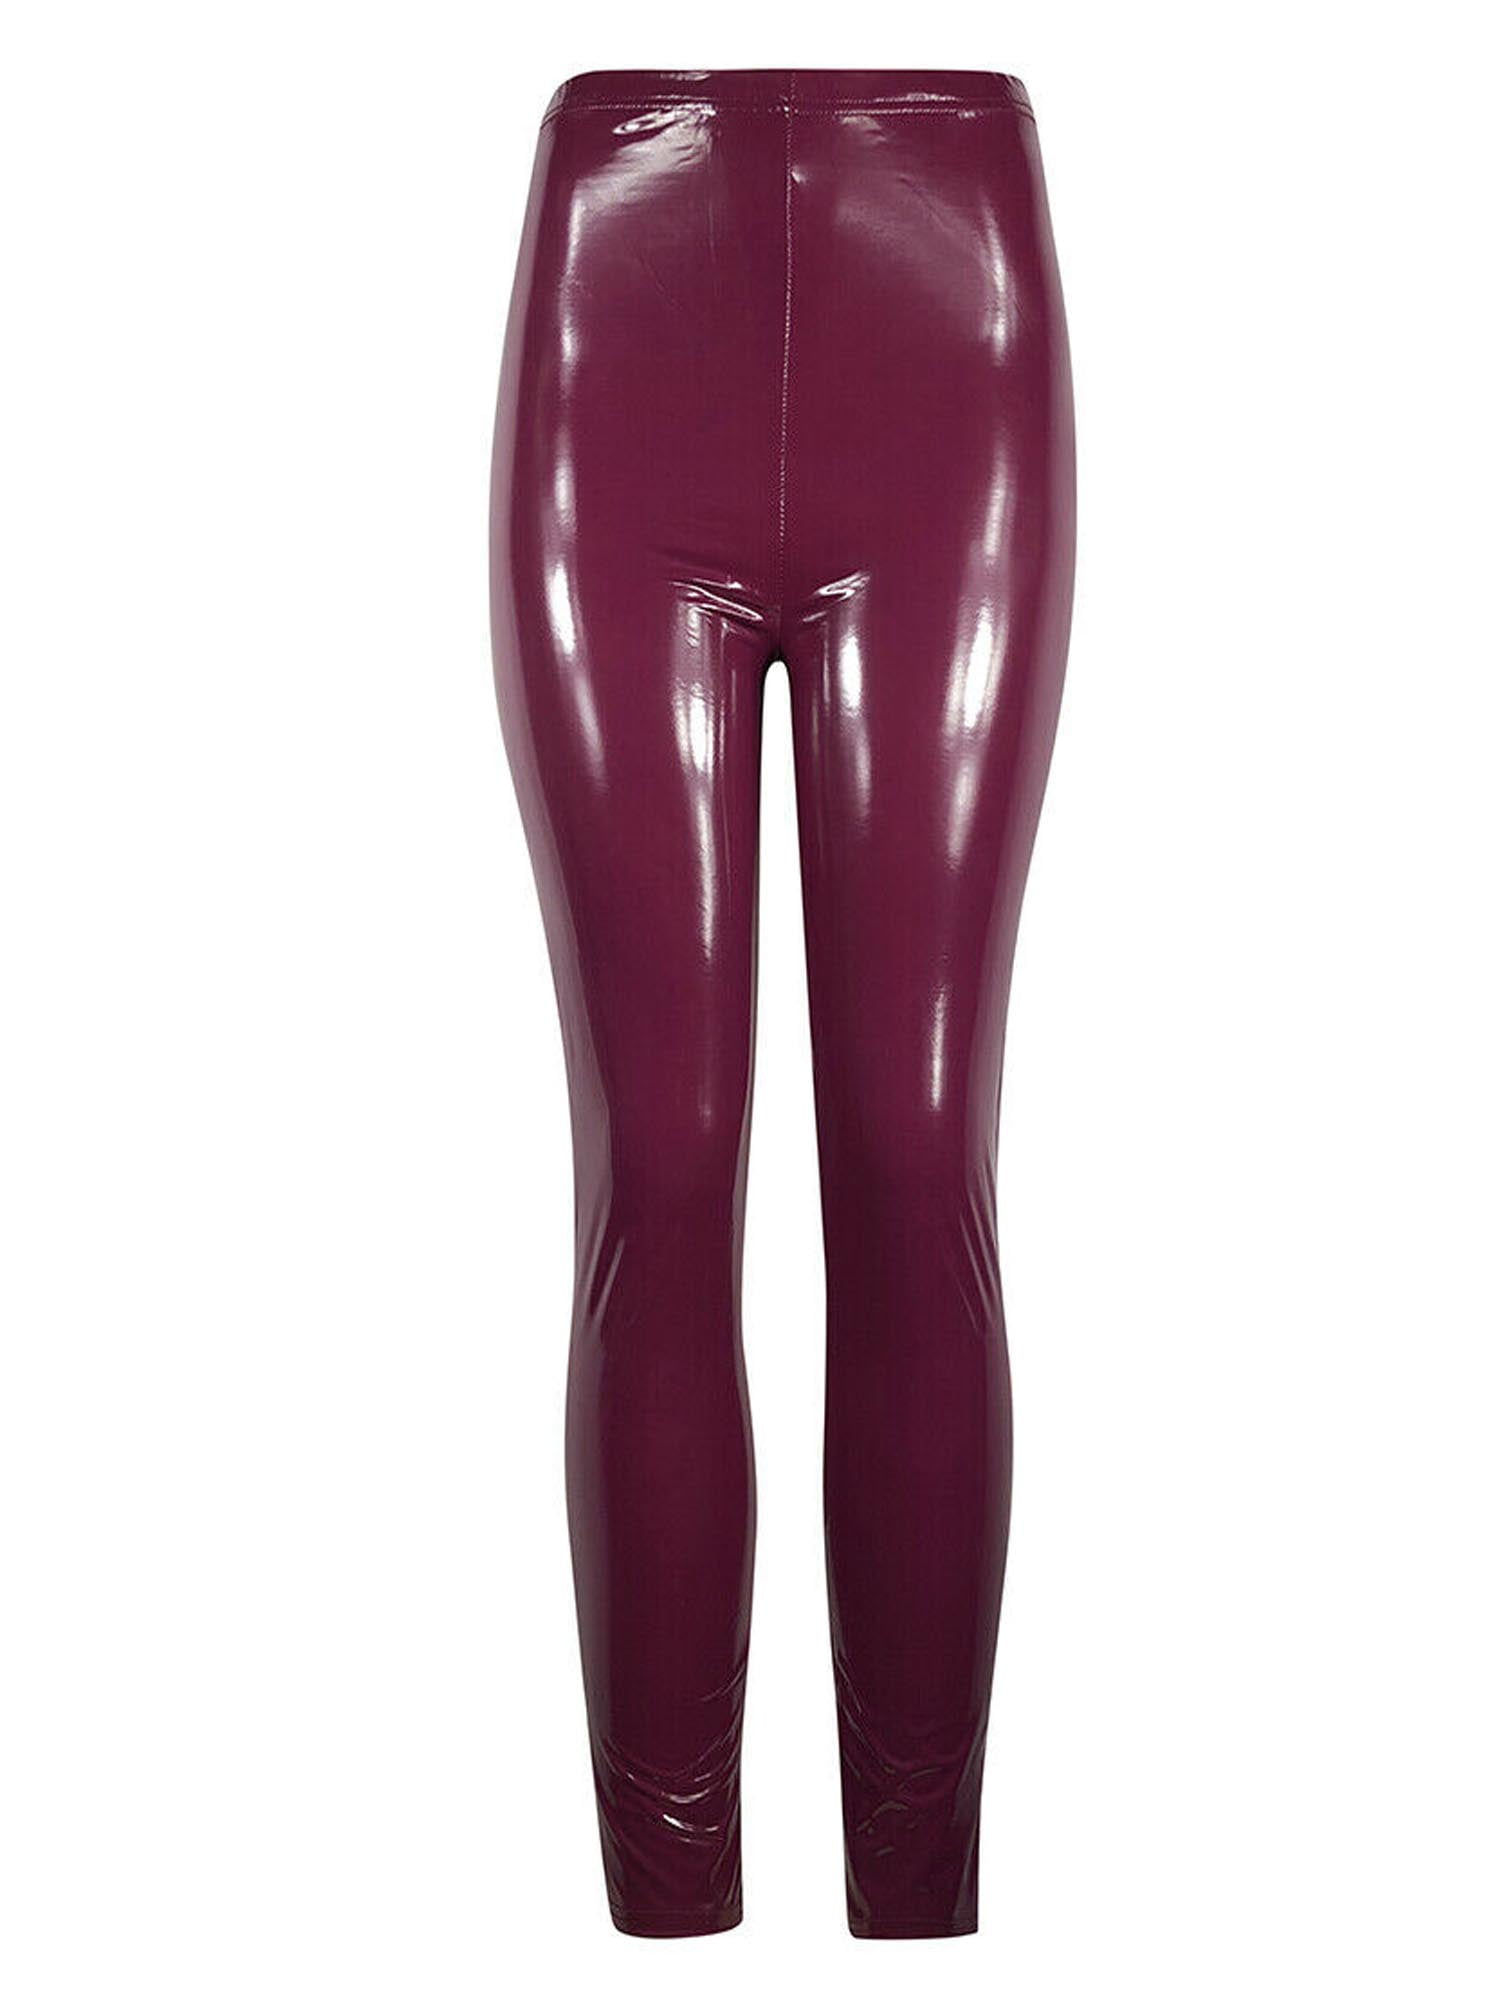 Women's Wet Look Stretchy Leather Pants High Waist Skinny PU Leather Pencil  Trousers Long Trousers 